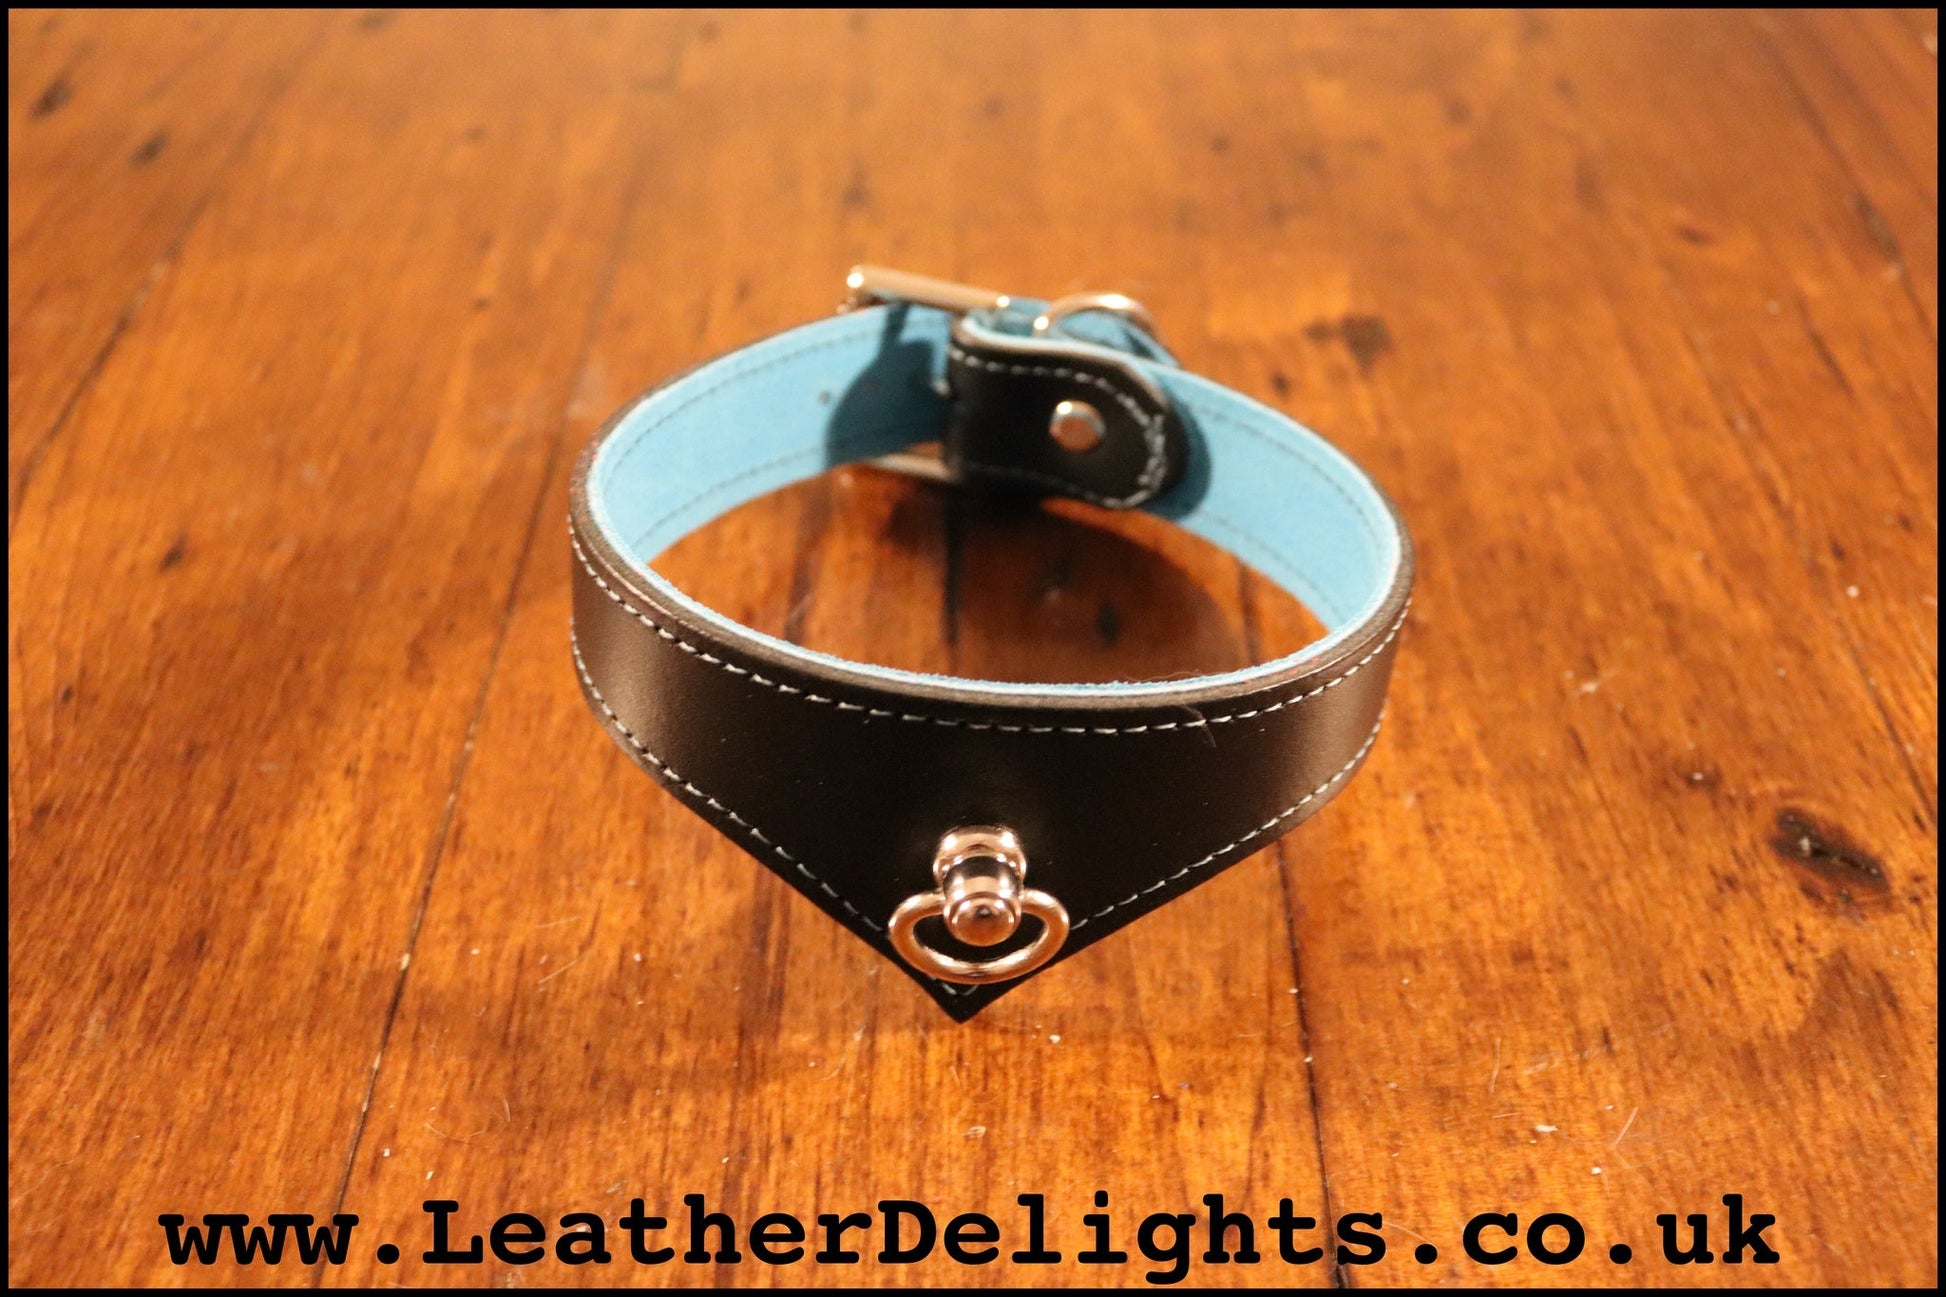 1" Wide Collar with Swivel Ring - Leather Delights